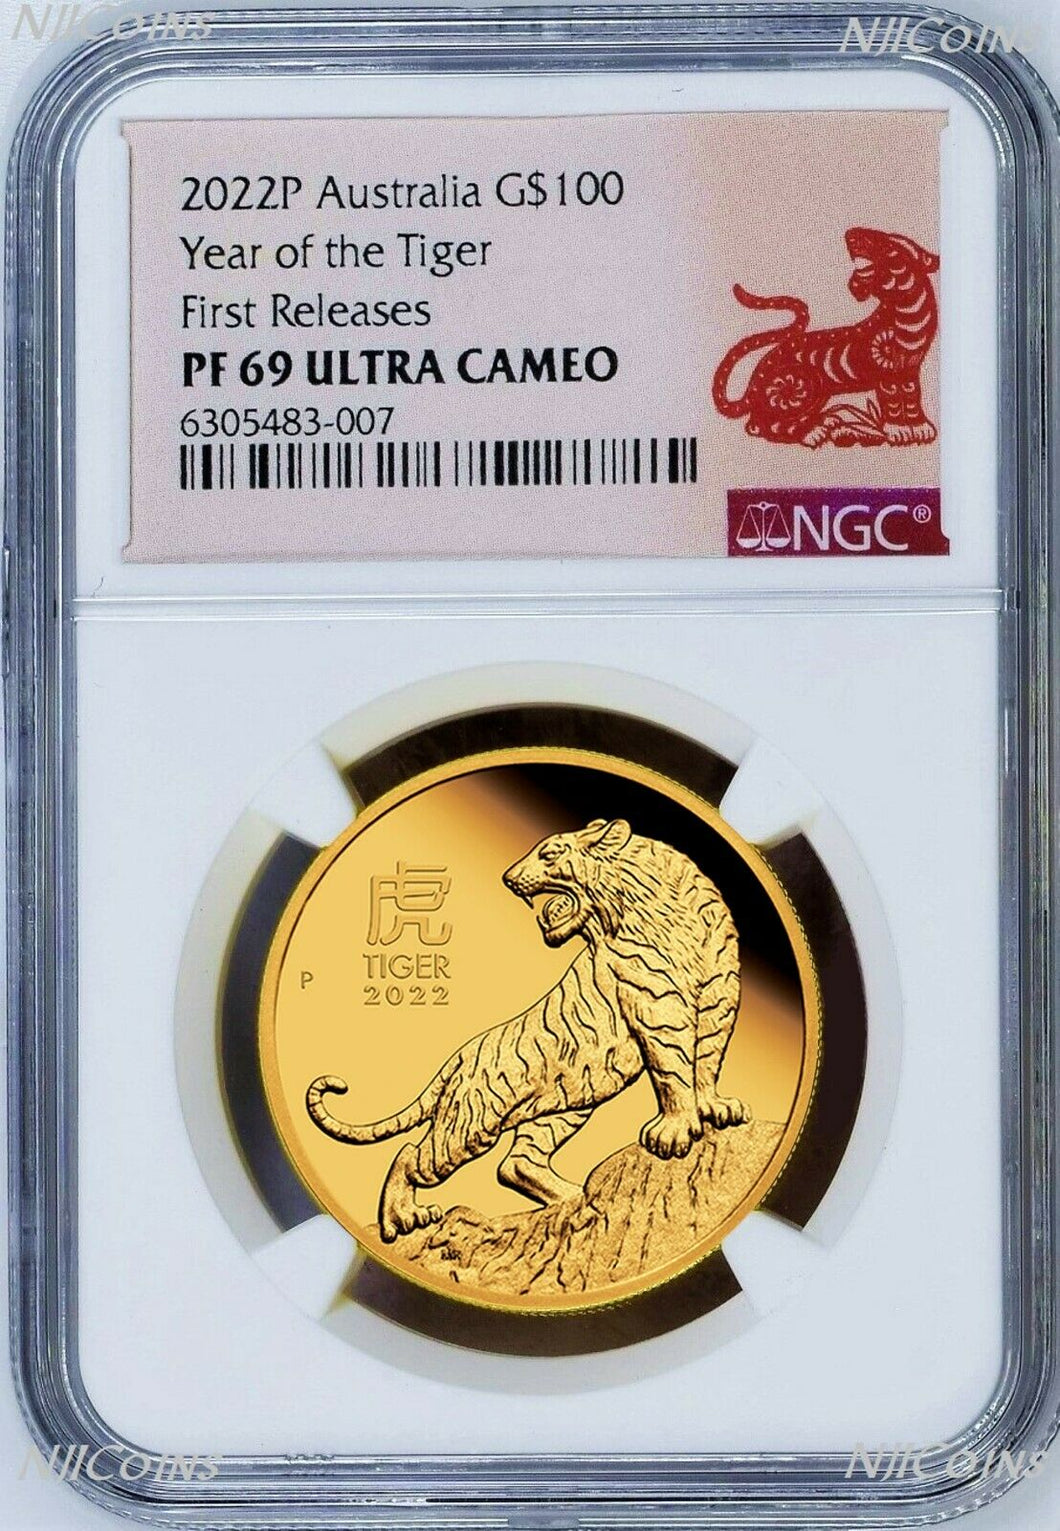 2022 P Australia PROOF GOLD $100 Lunar Year of the TIGER NGC PF69 1 oz Coin FR